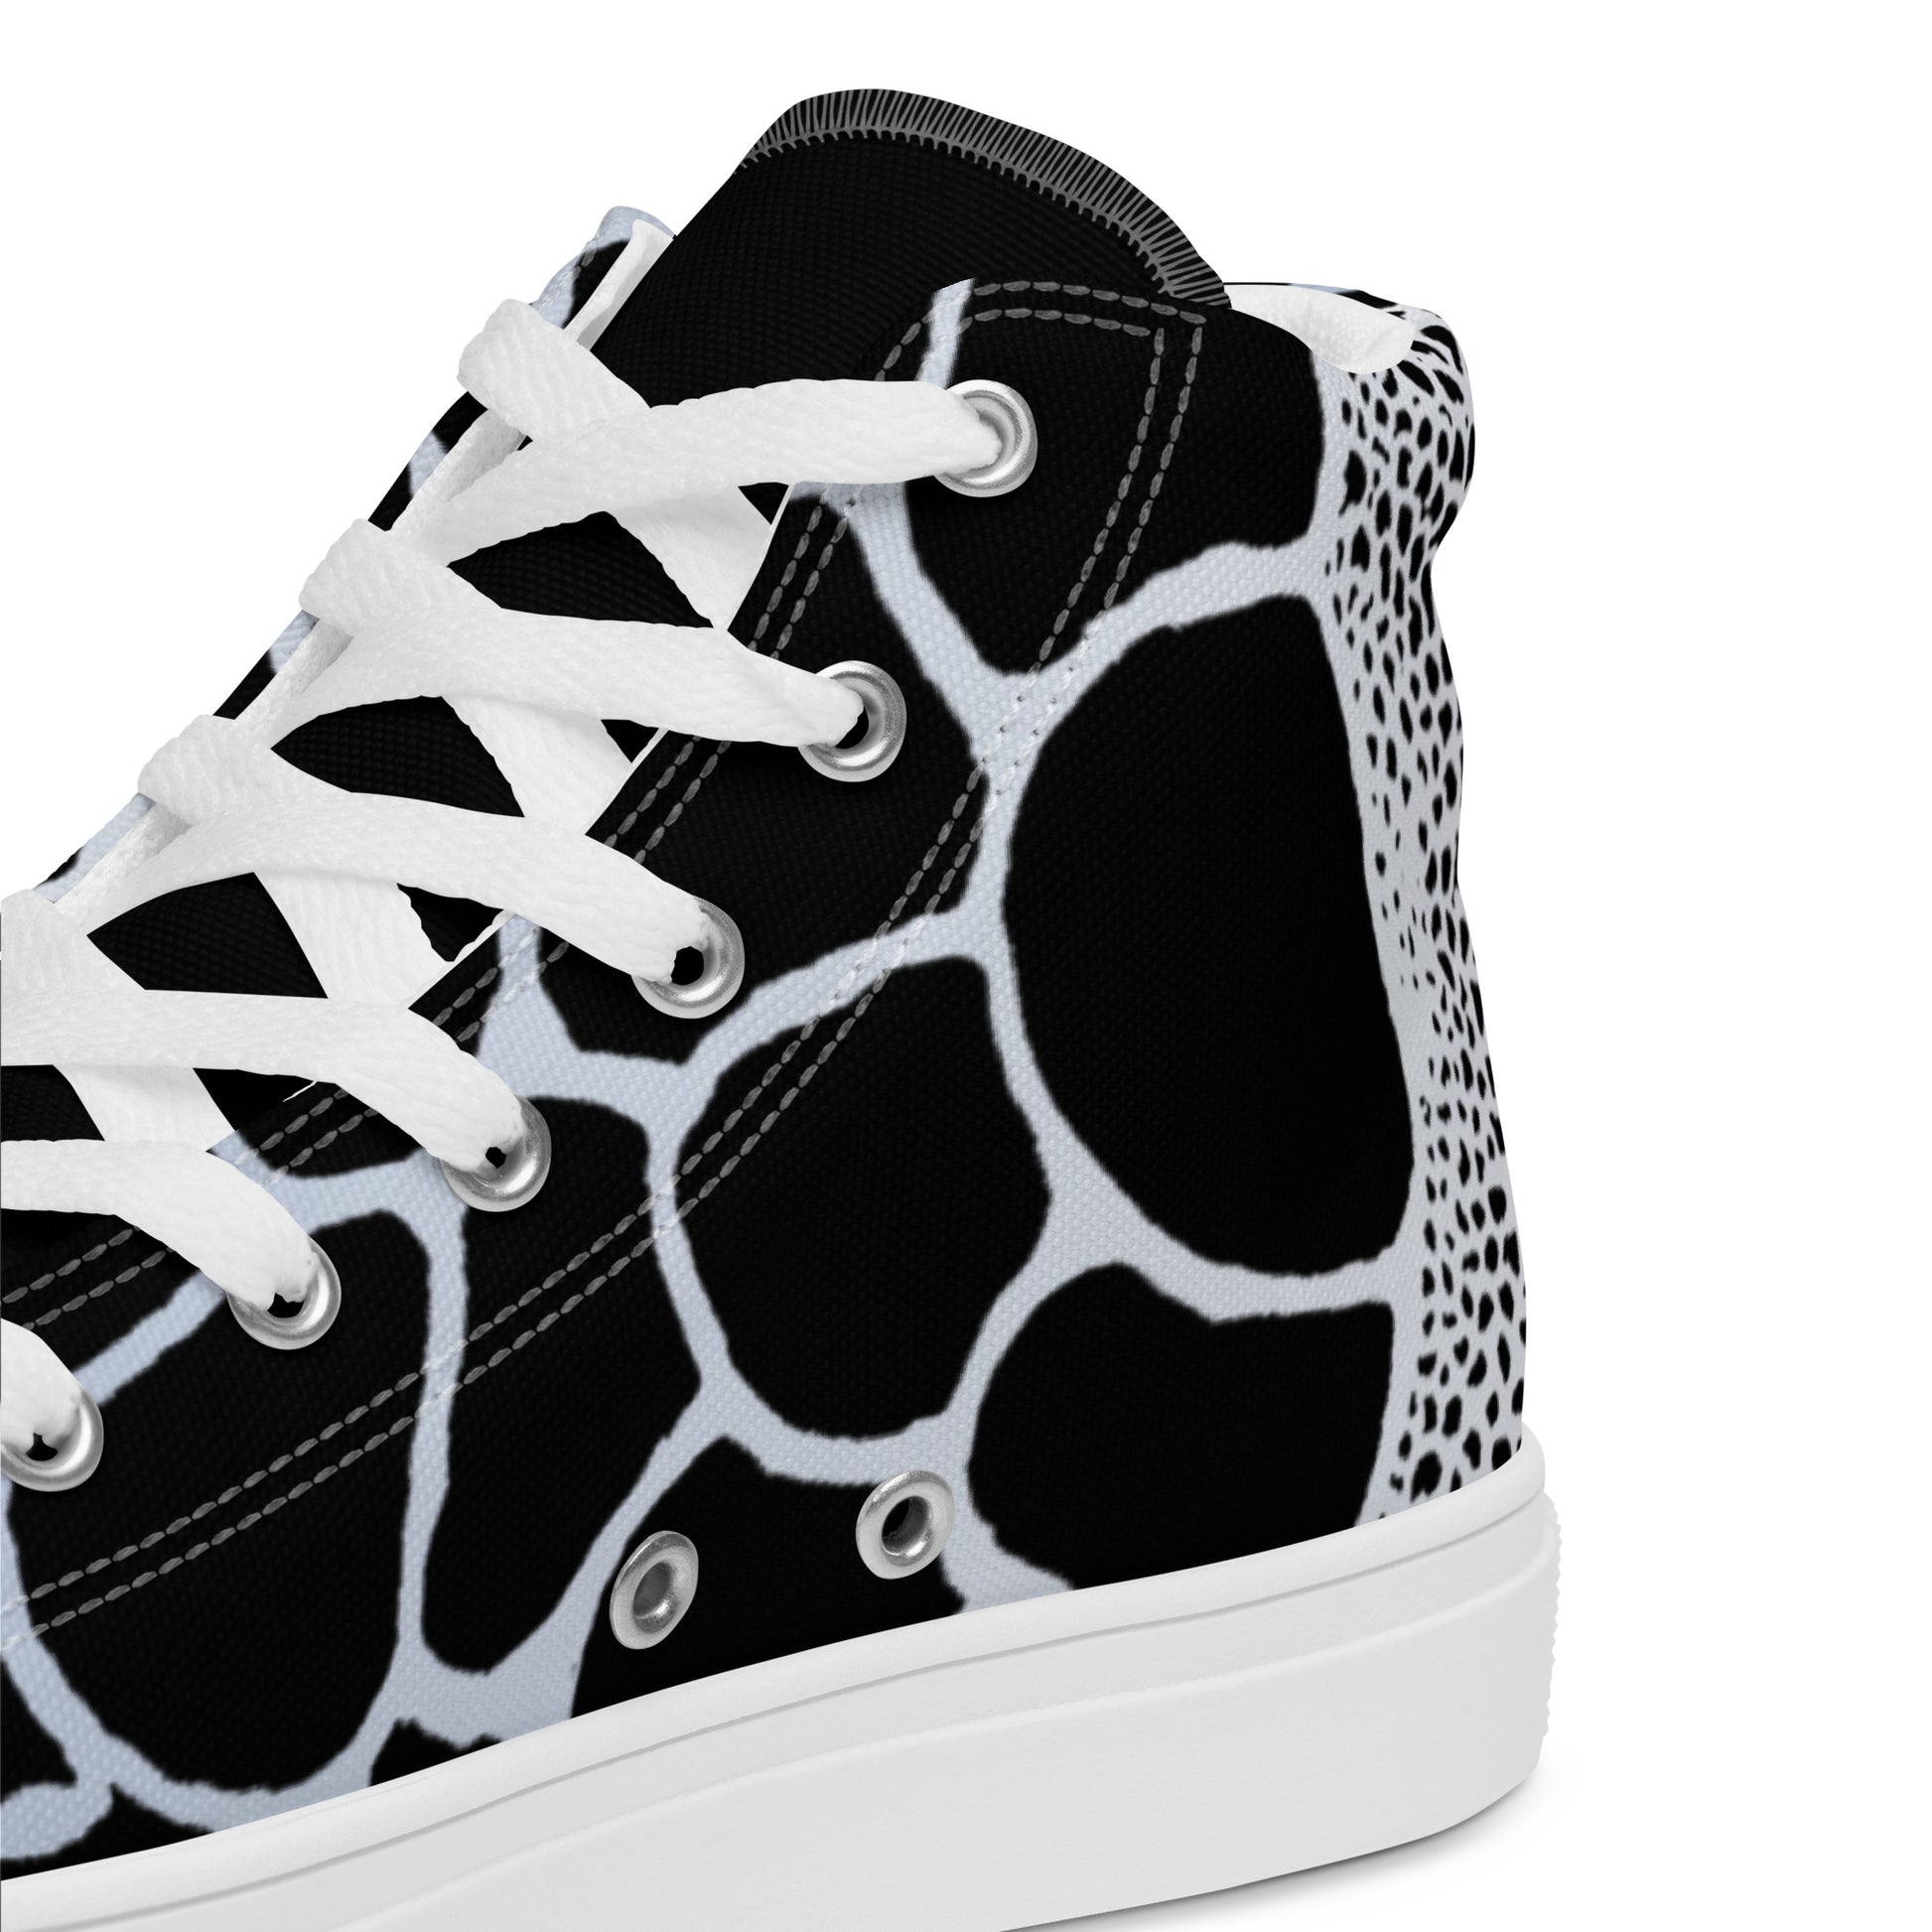 Organic Black Print Women’s High Top Canvas Shoes | Casual Print Shoes | Stylish Festival Sneakers | Abstract Shoes | Lace Up Sneakers | - Comfortable Culture - Shoes - Comfortable Culture